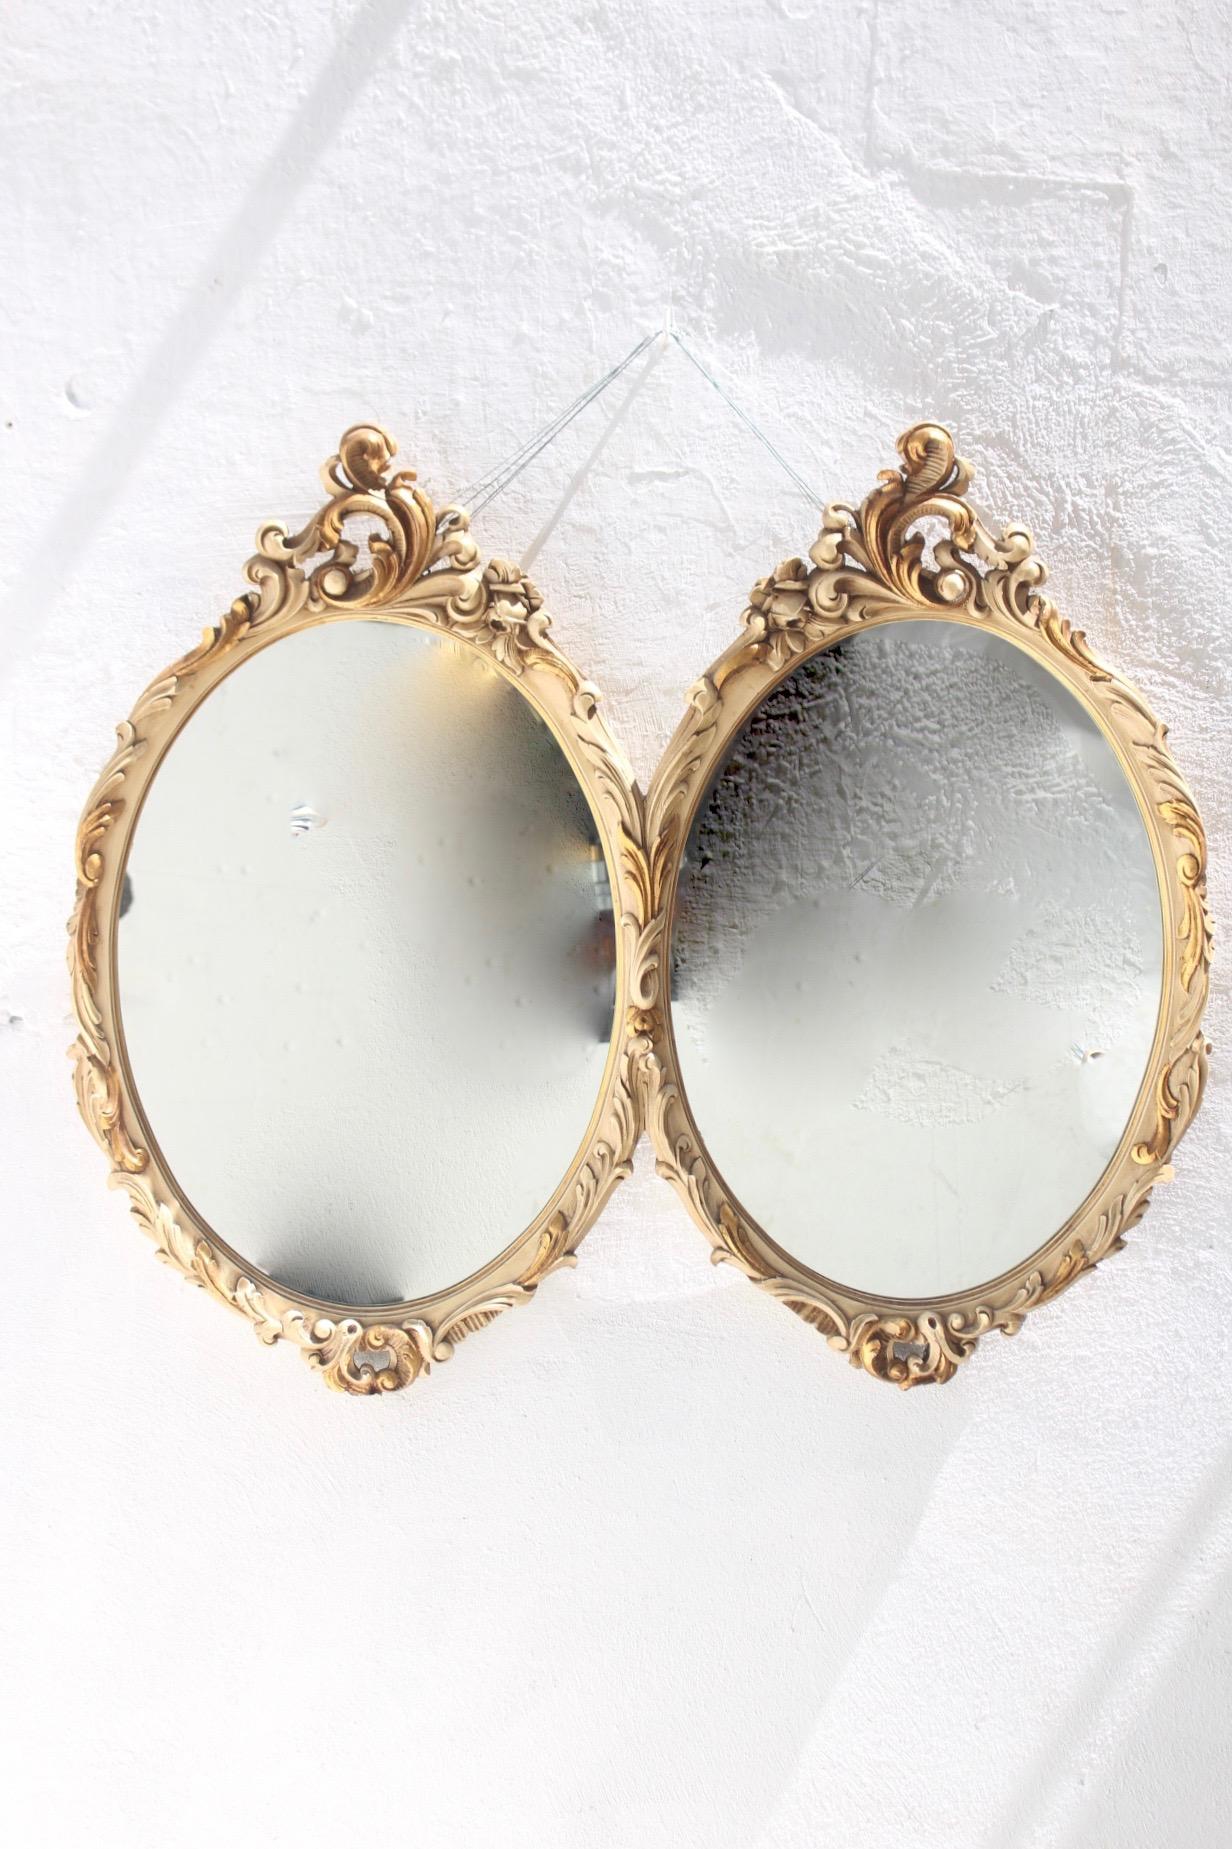 Neoclassical Revival Double Oval White Wood Mirror by Mariano García, 1960s For Sale 14